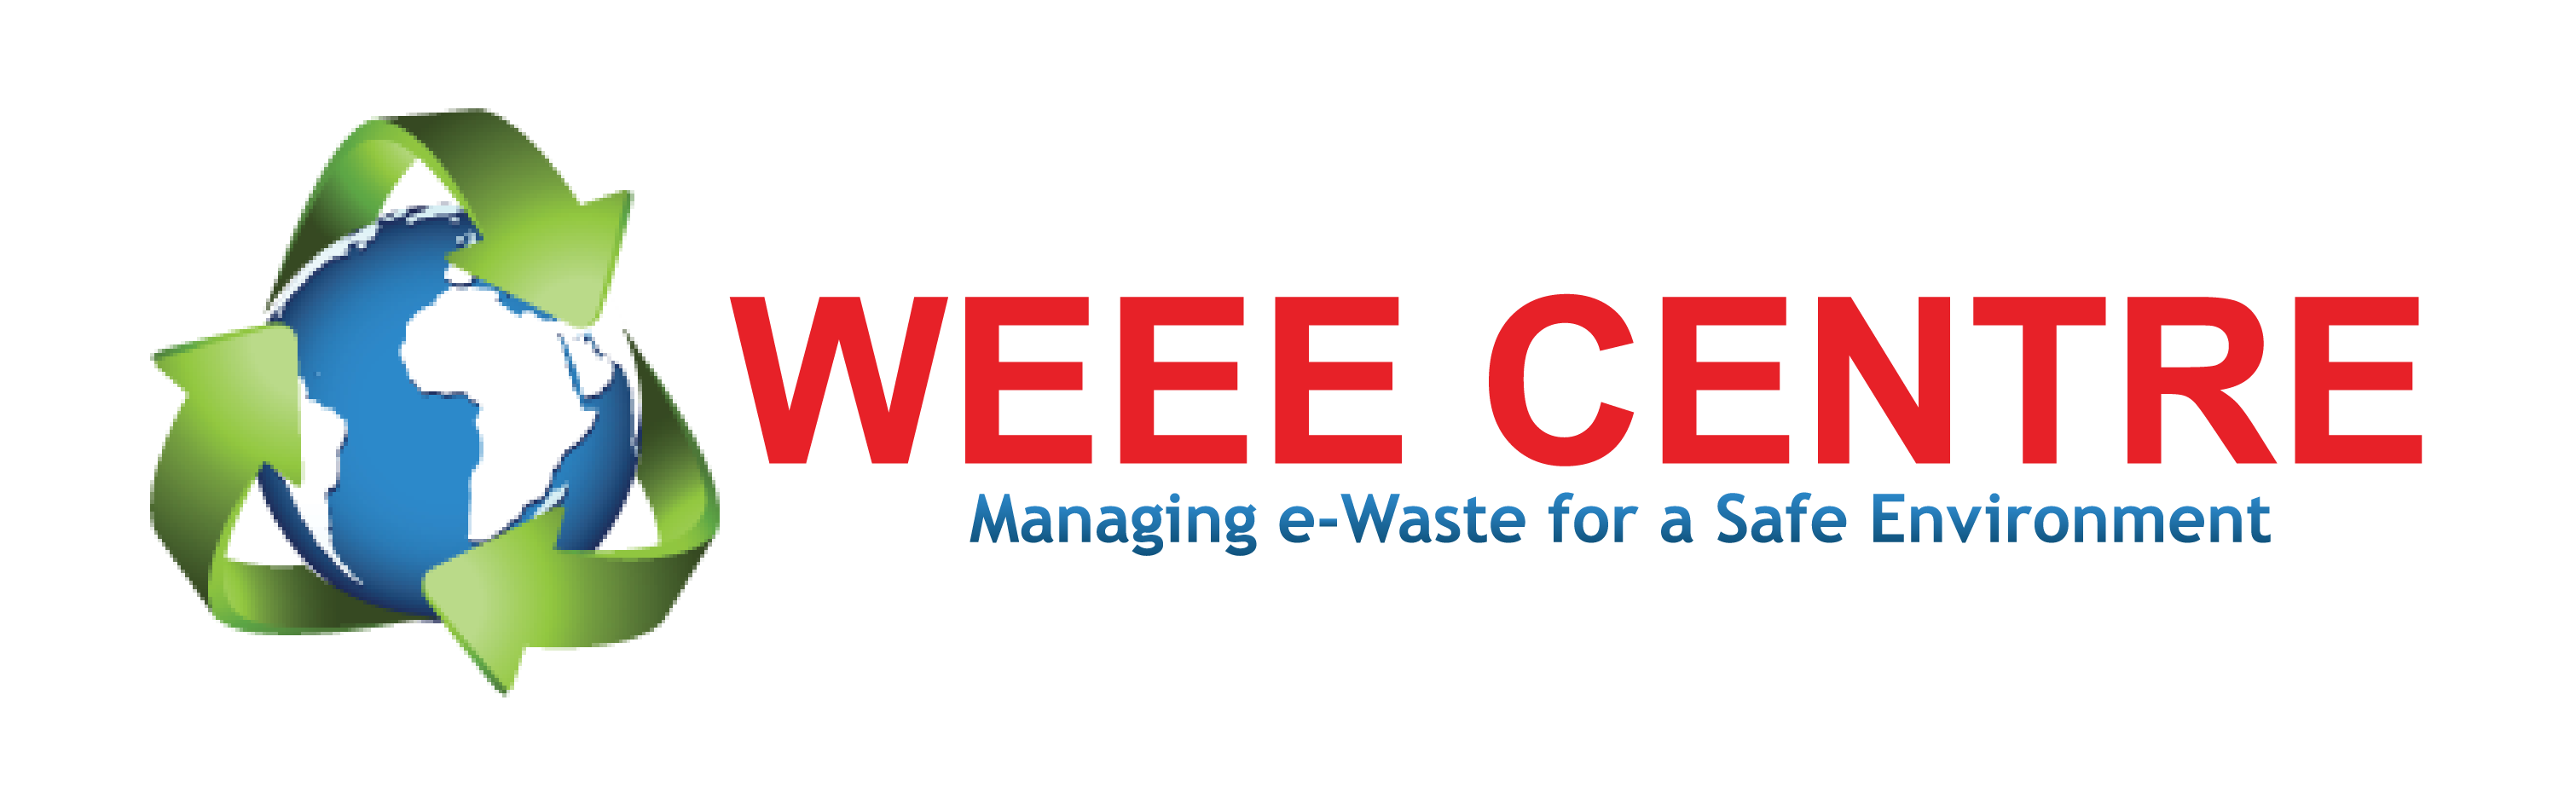 WEEE-CENTRE-LOGO-PNG.png